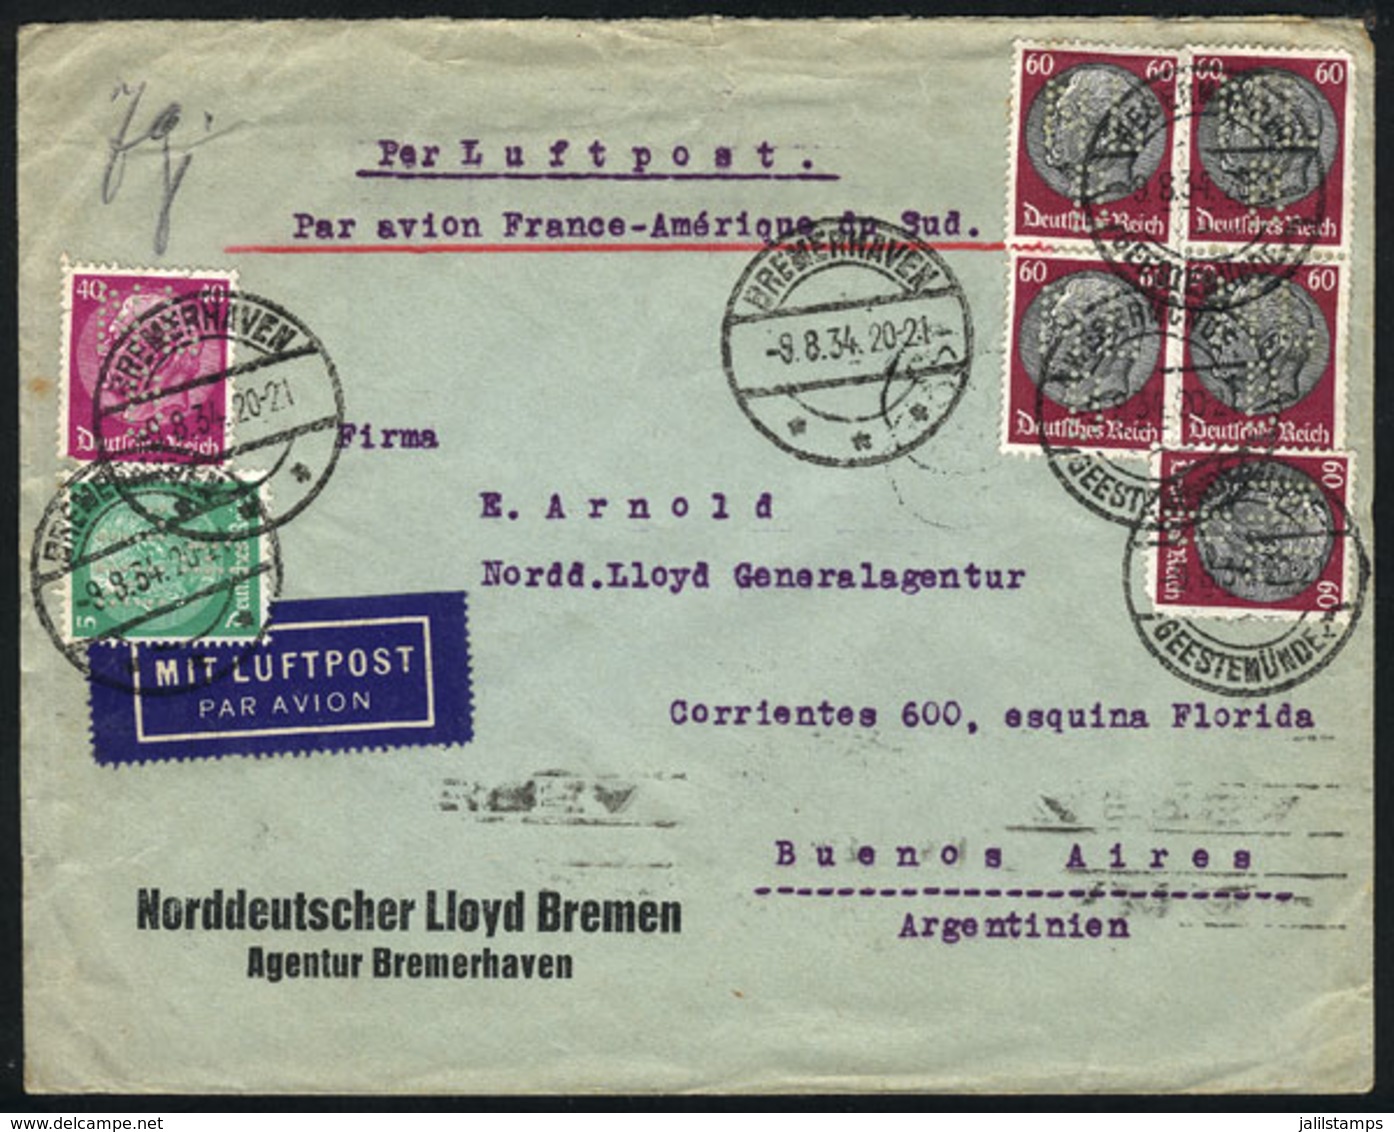 GERMANY: Airmail Cover Sent By Air France From Bremerhaven To Argentina On 9/AU/1934 Franked With 3.45Mk., All The Stamp - [Voorlopers